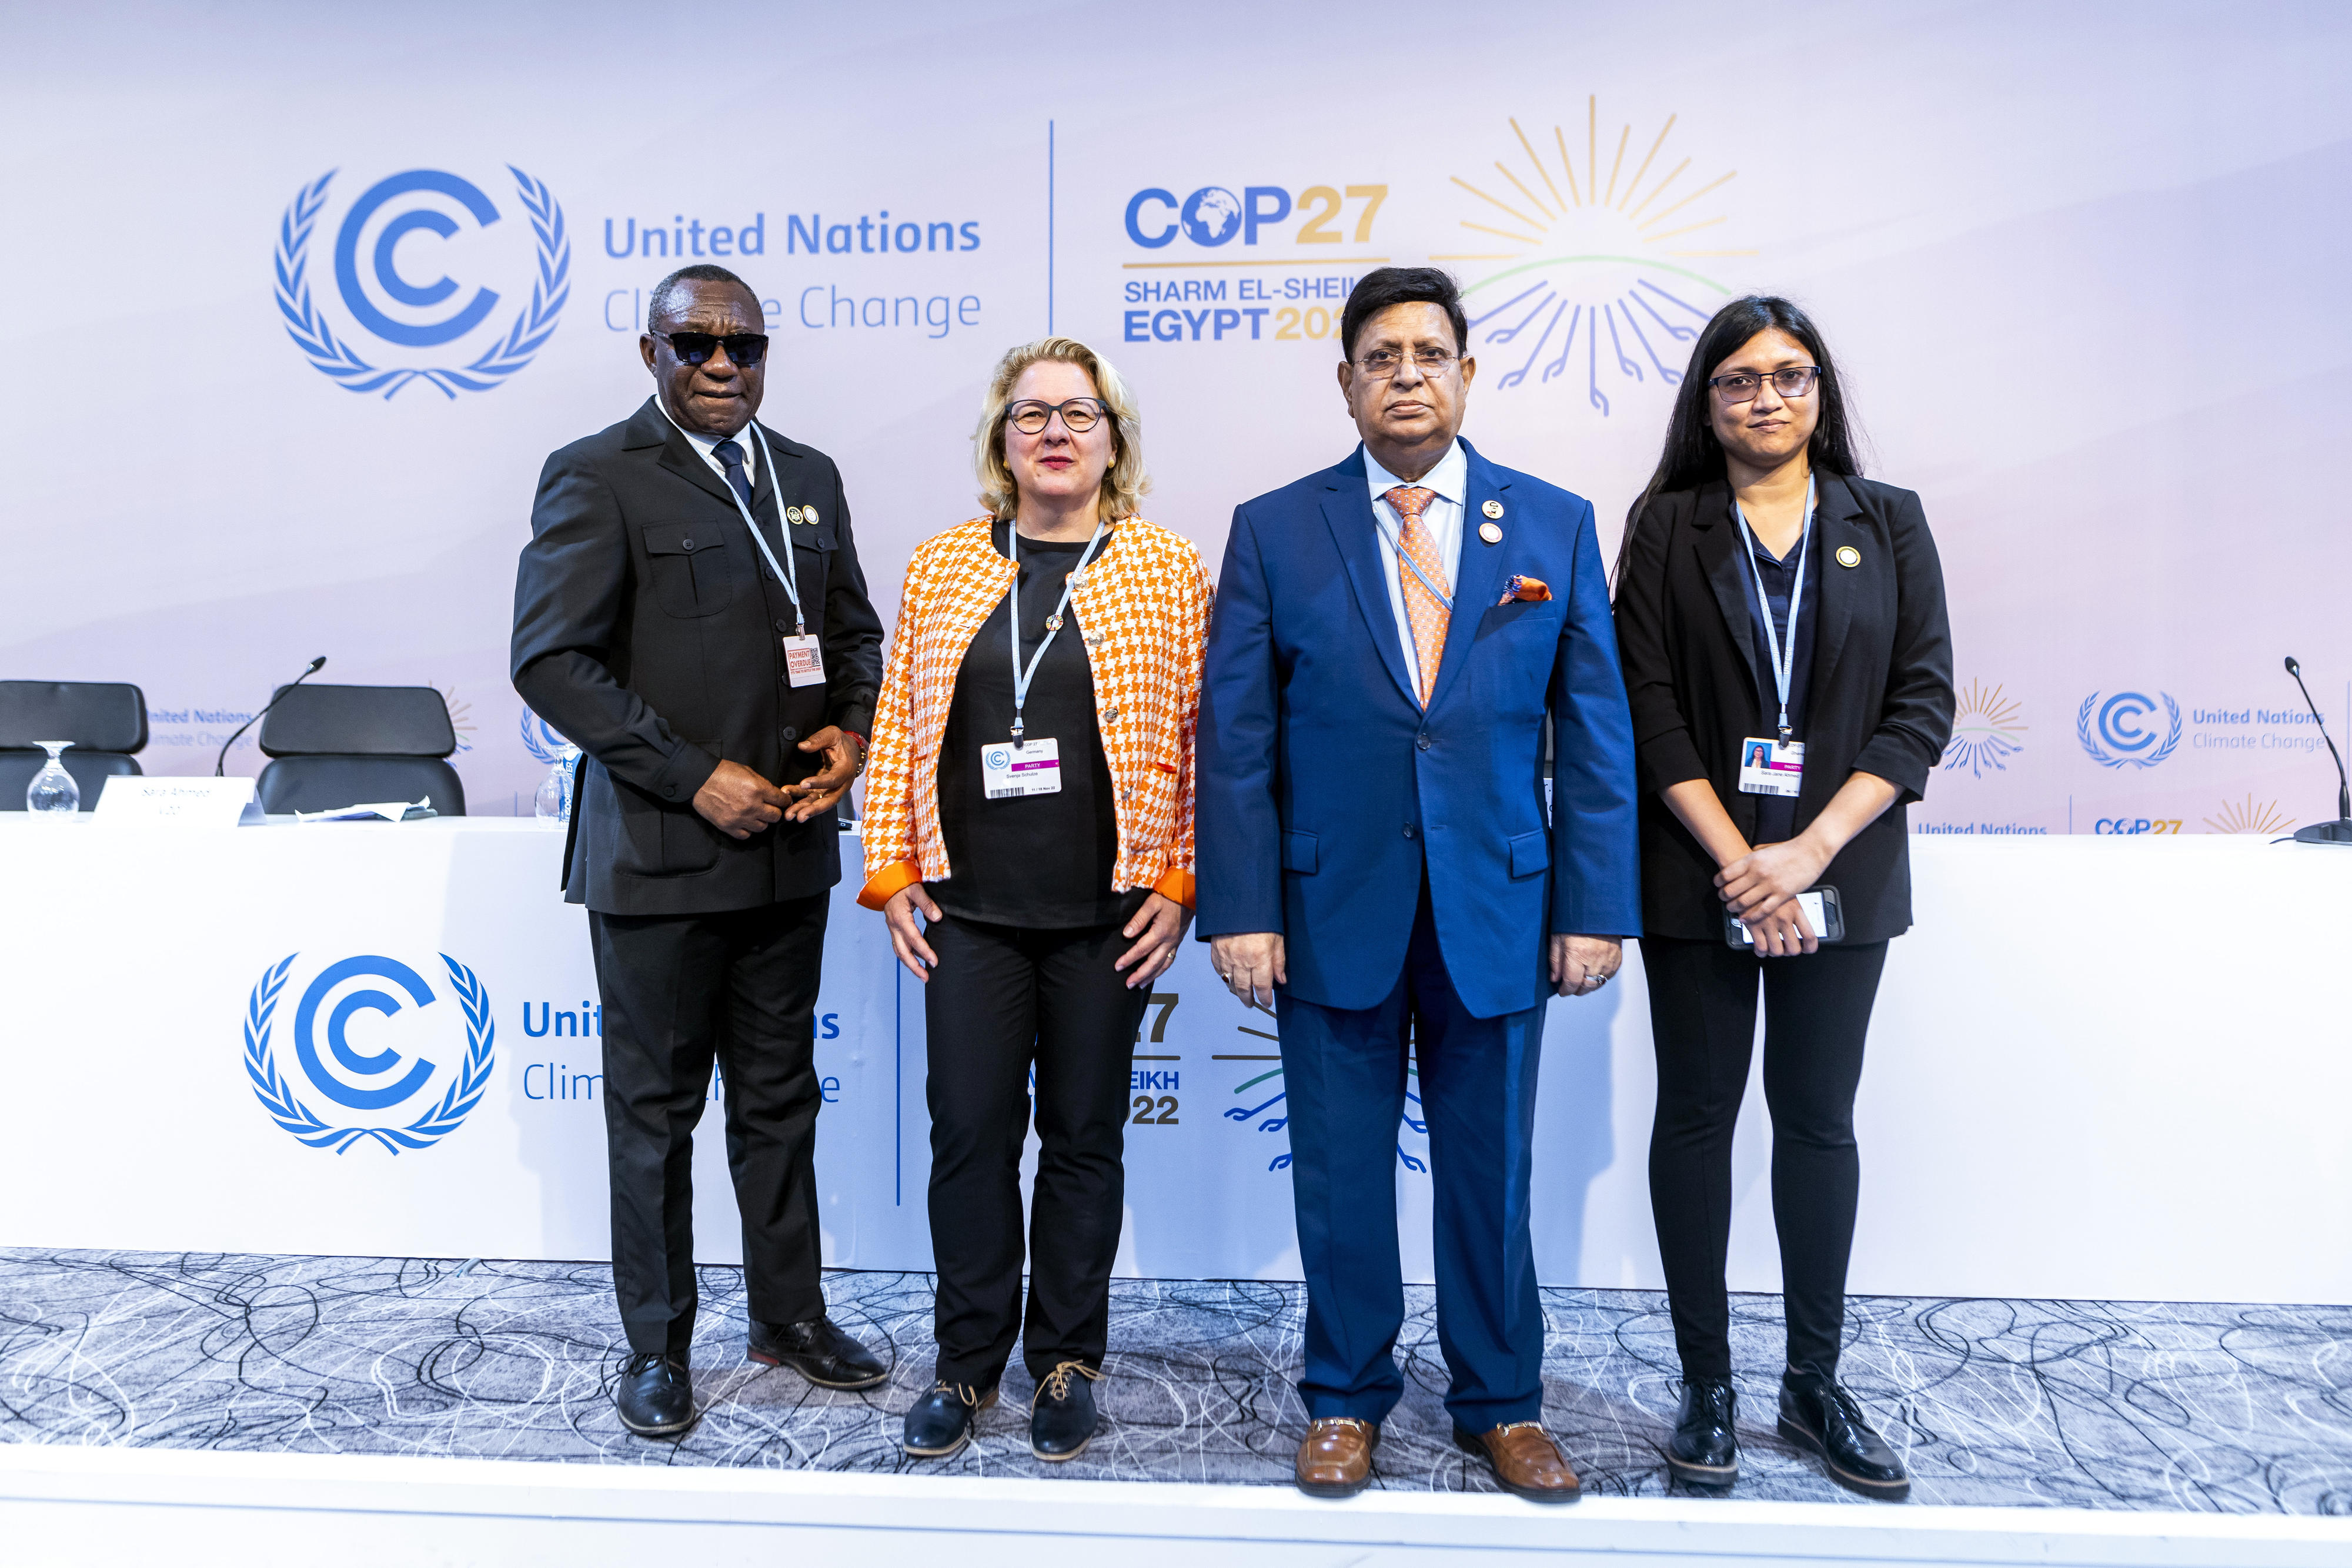 Henry Kokofu, Special Envoy of the Climate Vulnerable Forum (CVF) Ghana Presidency, Federal Minister for Economic Cooperation and Development, Svenja Schulze, Foreign Minister of Bangladesh, Abdul Momen, and Sara Ahmed of the V20, before a press conference on the launch of the Global Shield against Climate Risks at COP27 in Sharm El-Sheikh